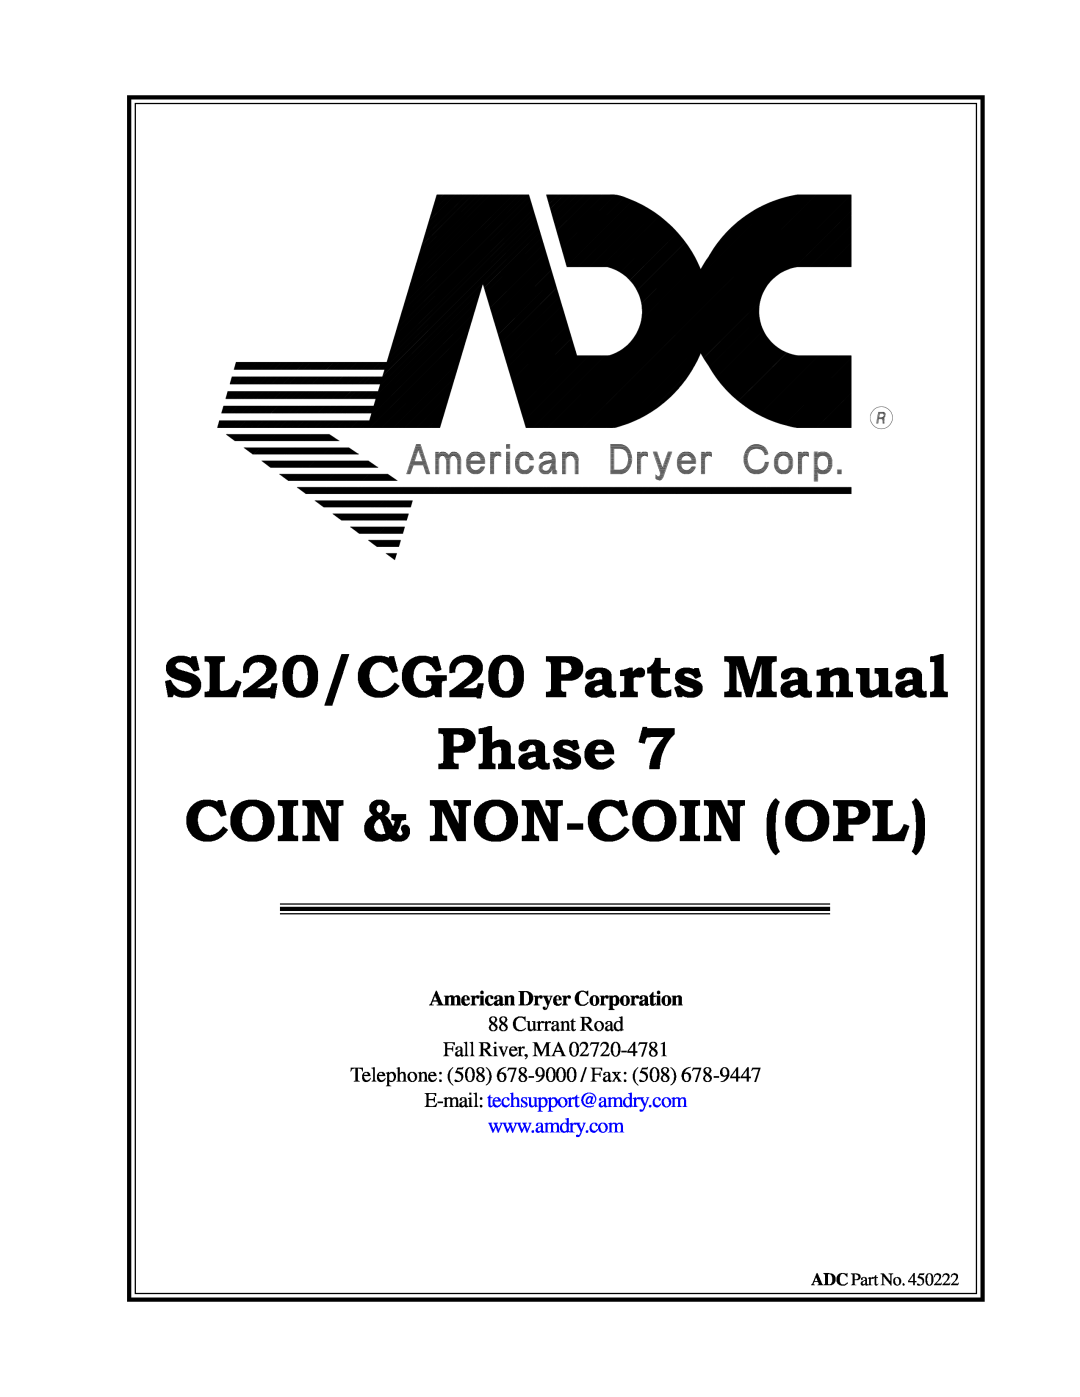 American Dryer Corp manual American Dryer Corporation, Phase, Coin & Non-Coin Opl, SL20/CG20 Parts Manual 